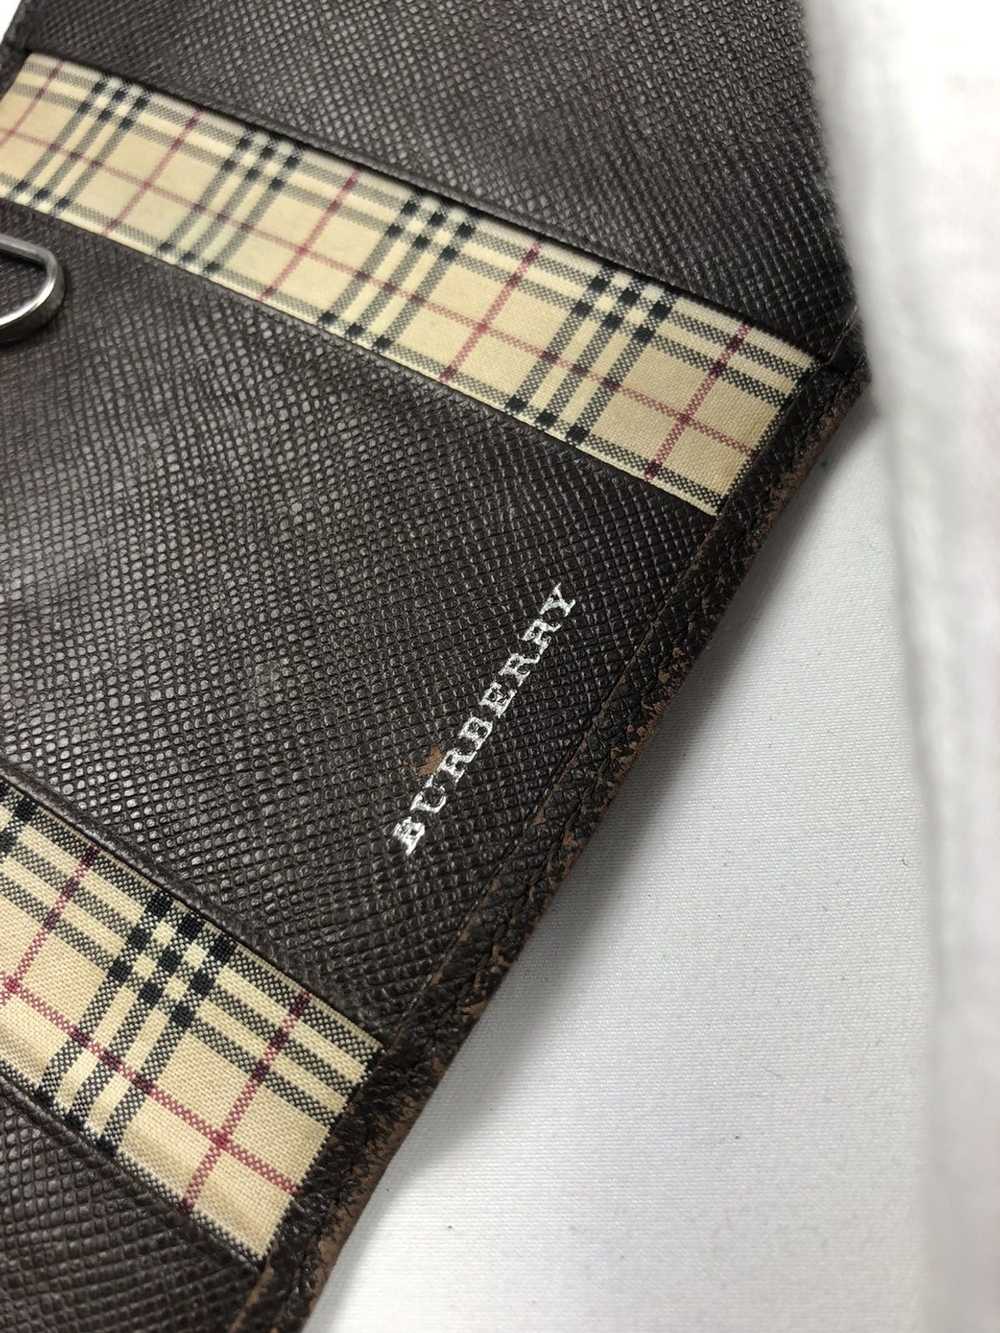 Burberry Burberry check leather key holder - image 4